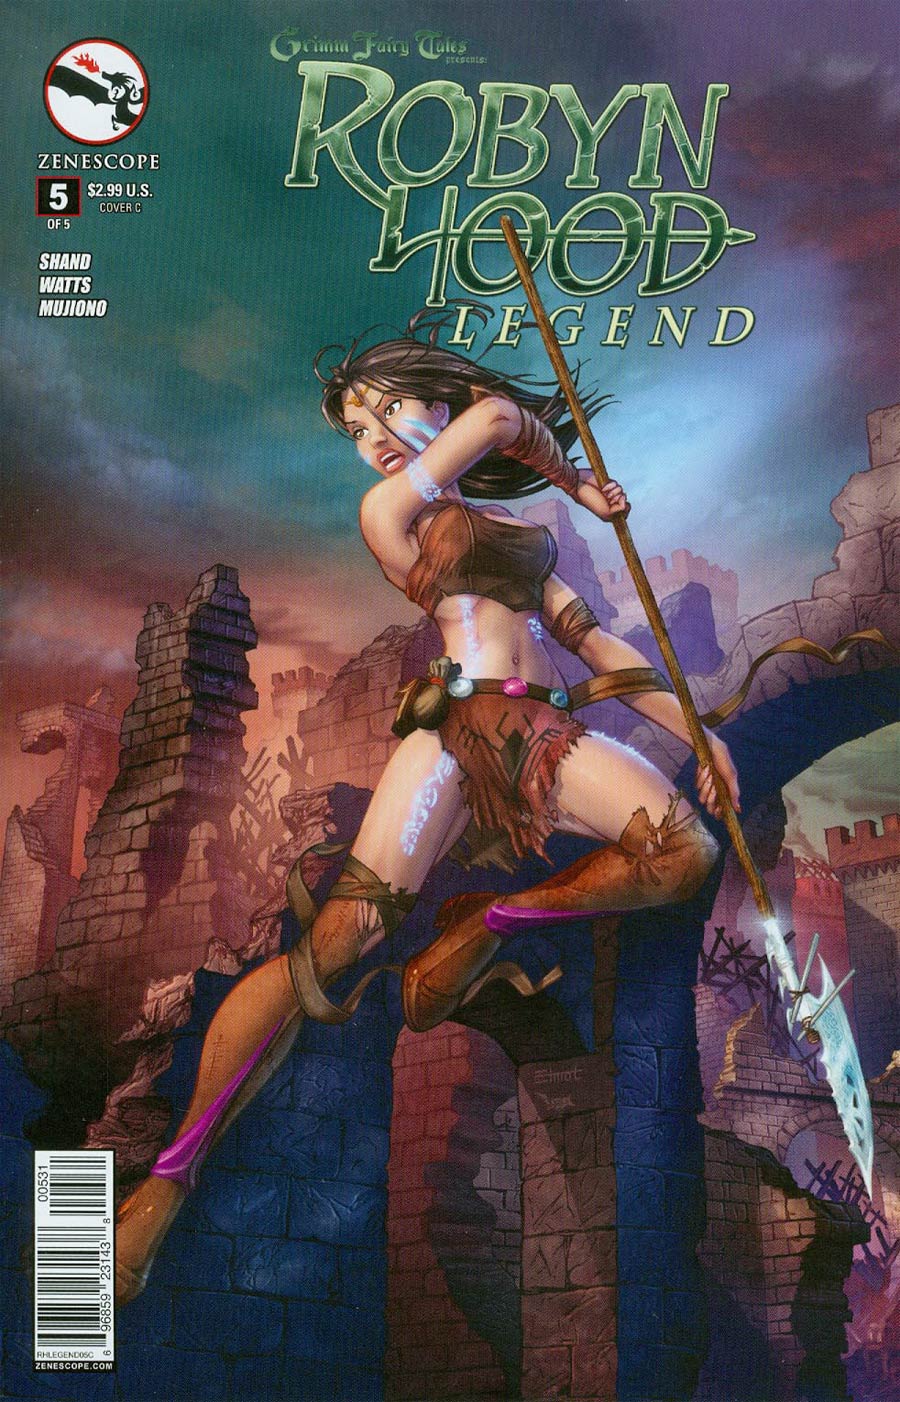 Grimm Fairy Tales Presents Robyn Hood Legend #5 Cover C Chris Ehnot